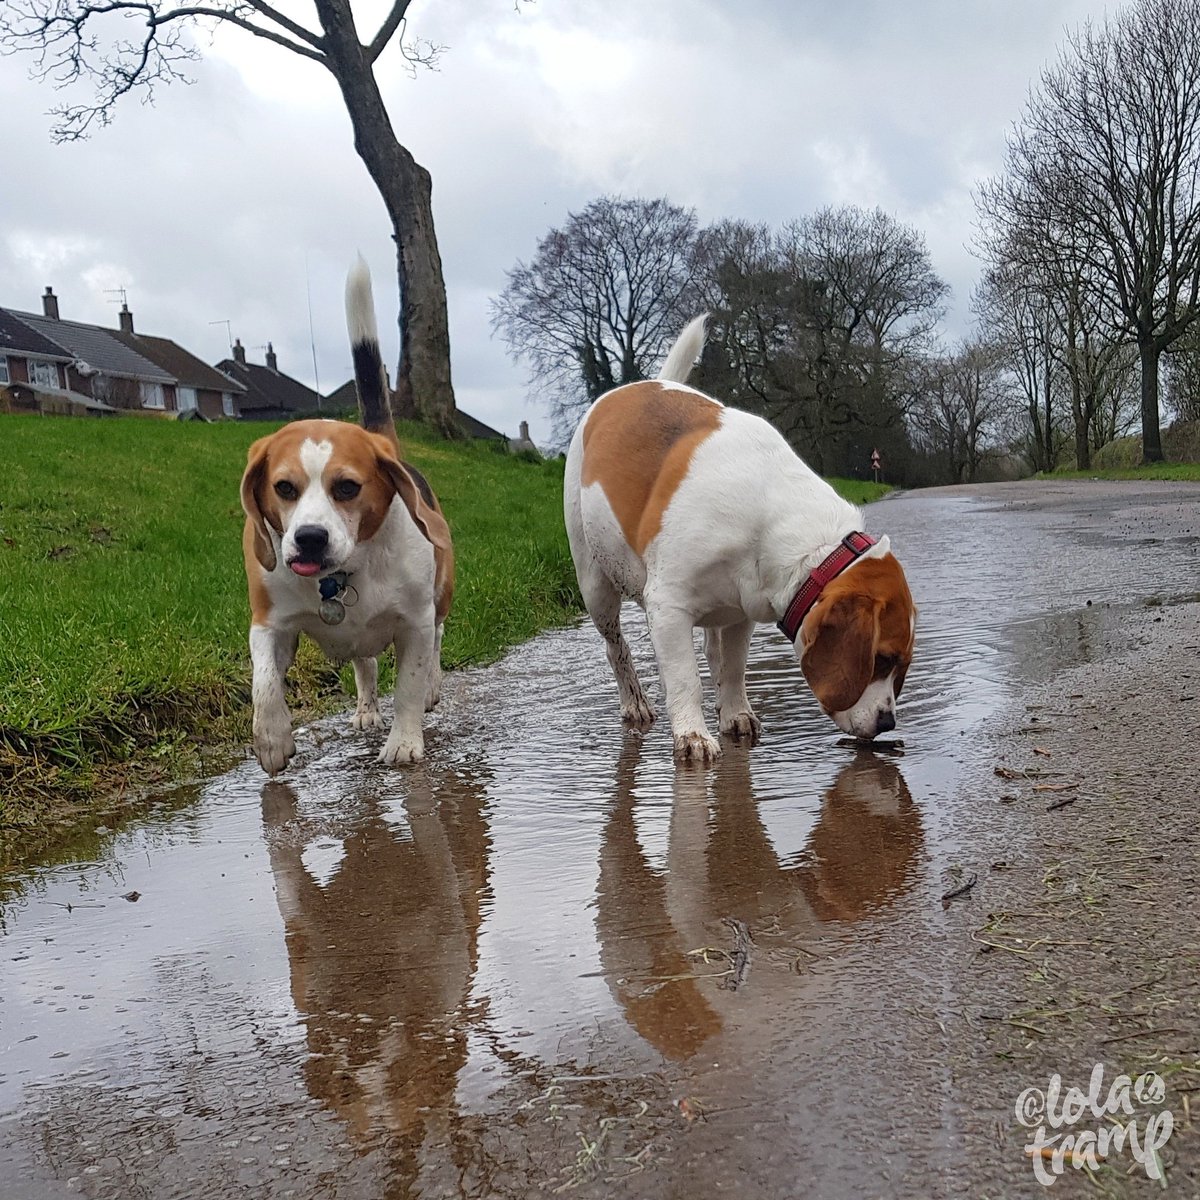 It seems we have a new drinking hole now thanks to Storm Gareth 😜😜🤣🤣❤❤
#beagles #dogsoftwitter #stormgareth